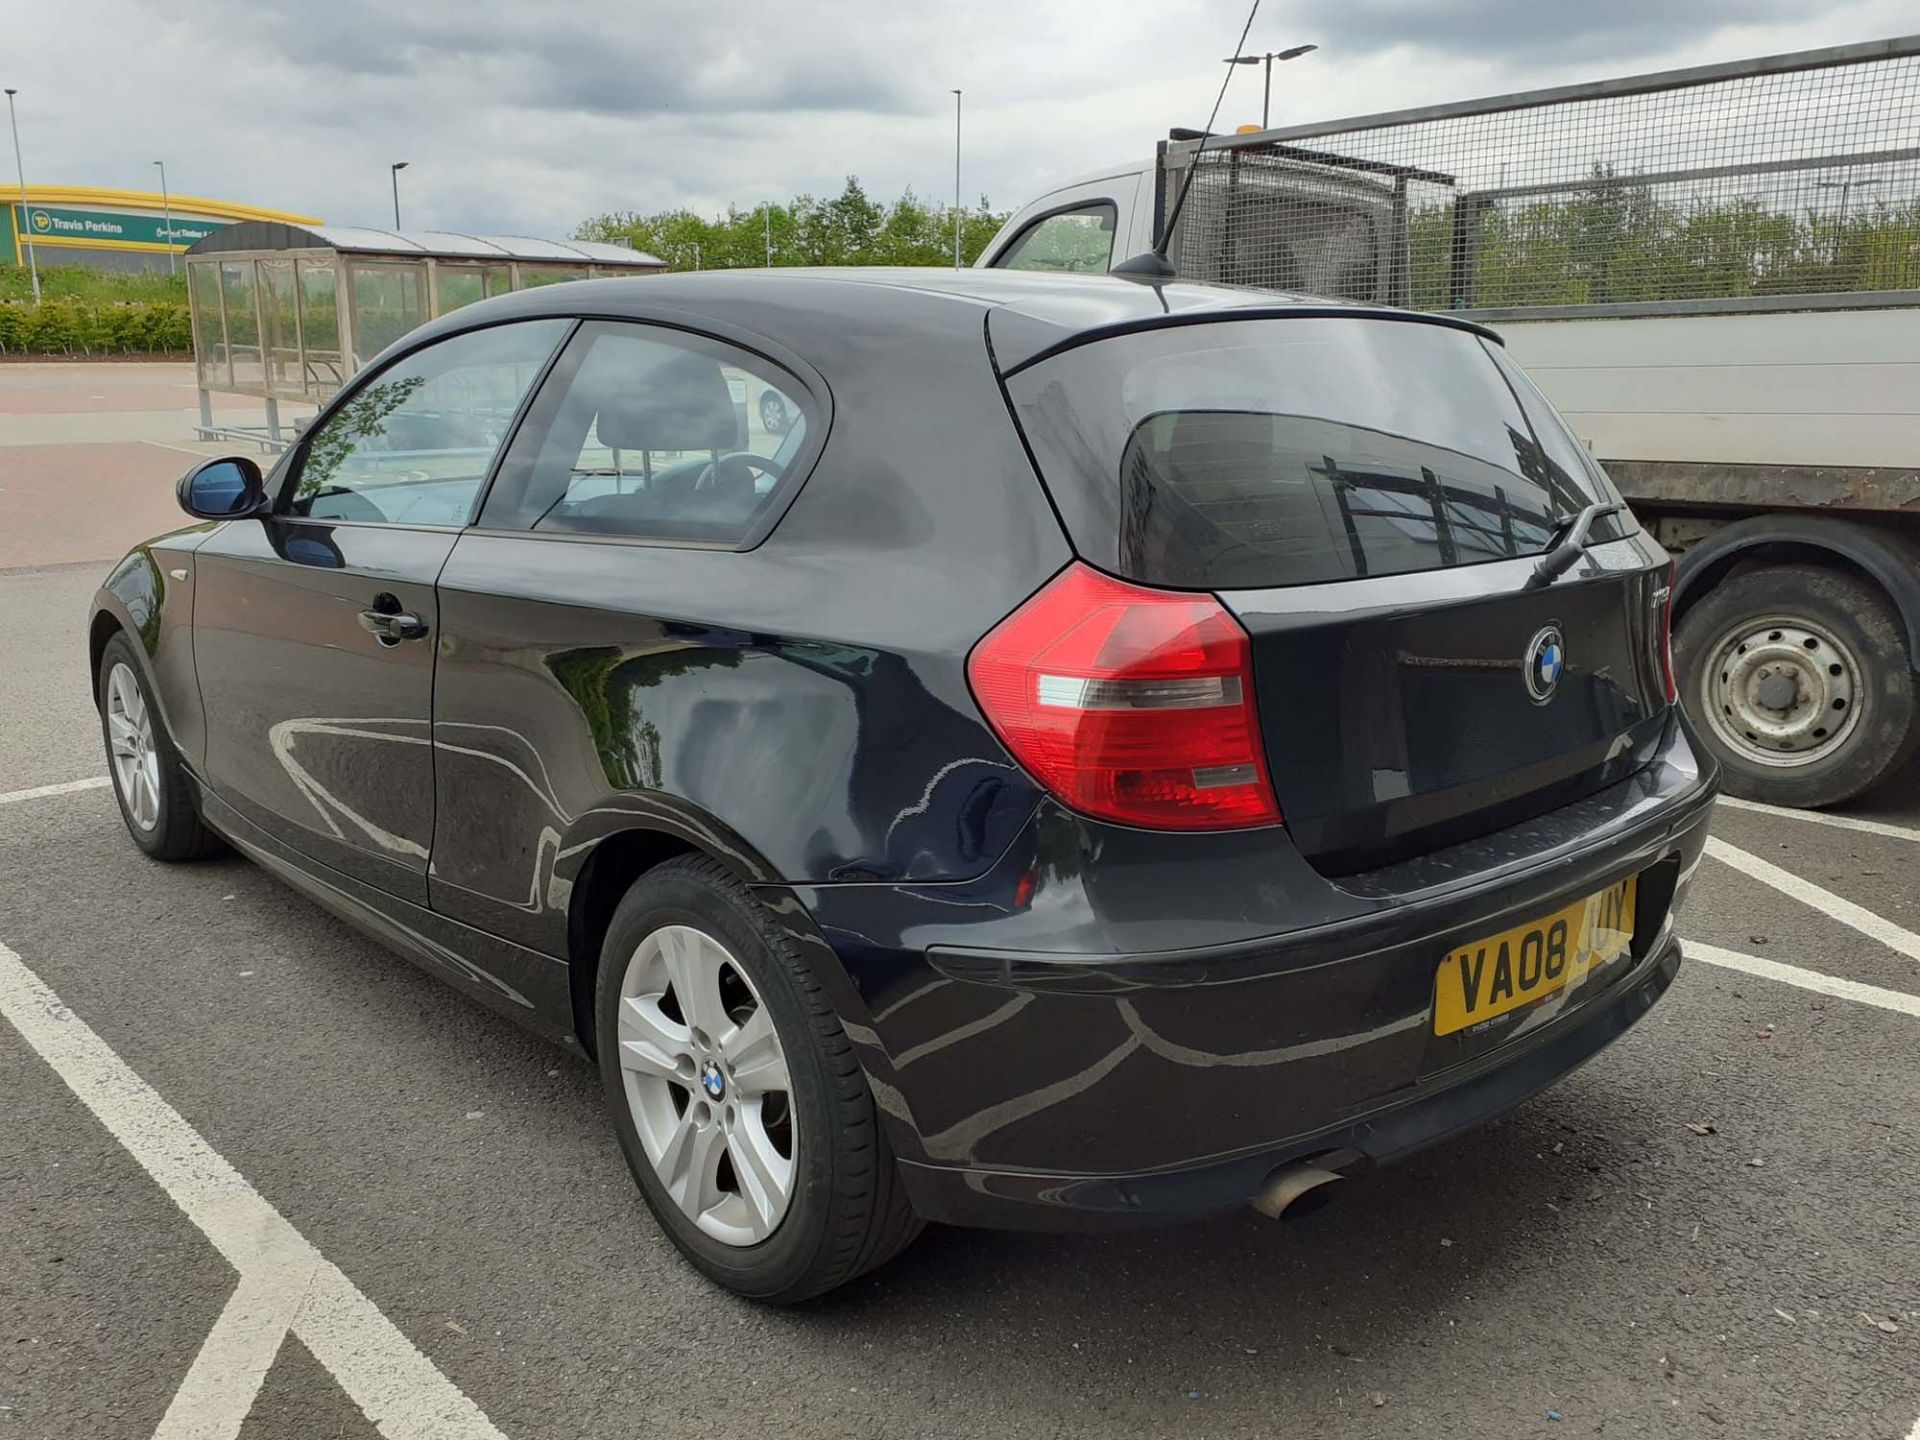 BMW 1161SE in black, registration VA08 JUY, 1600cc, petrol, with receipts and old MOT's, No V5 - Image 3 of 7